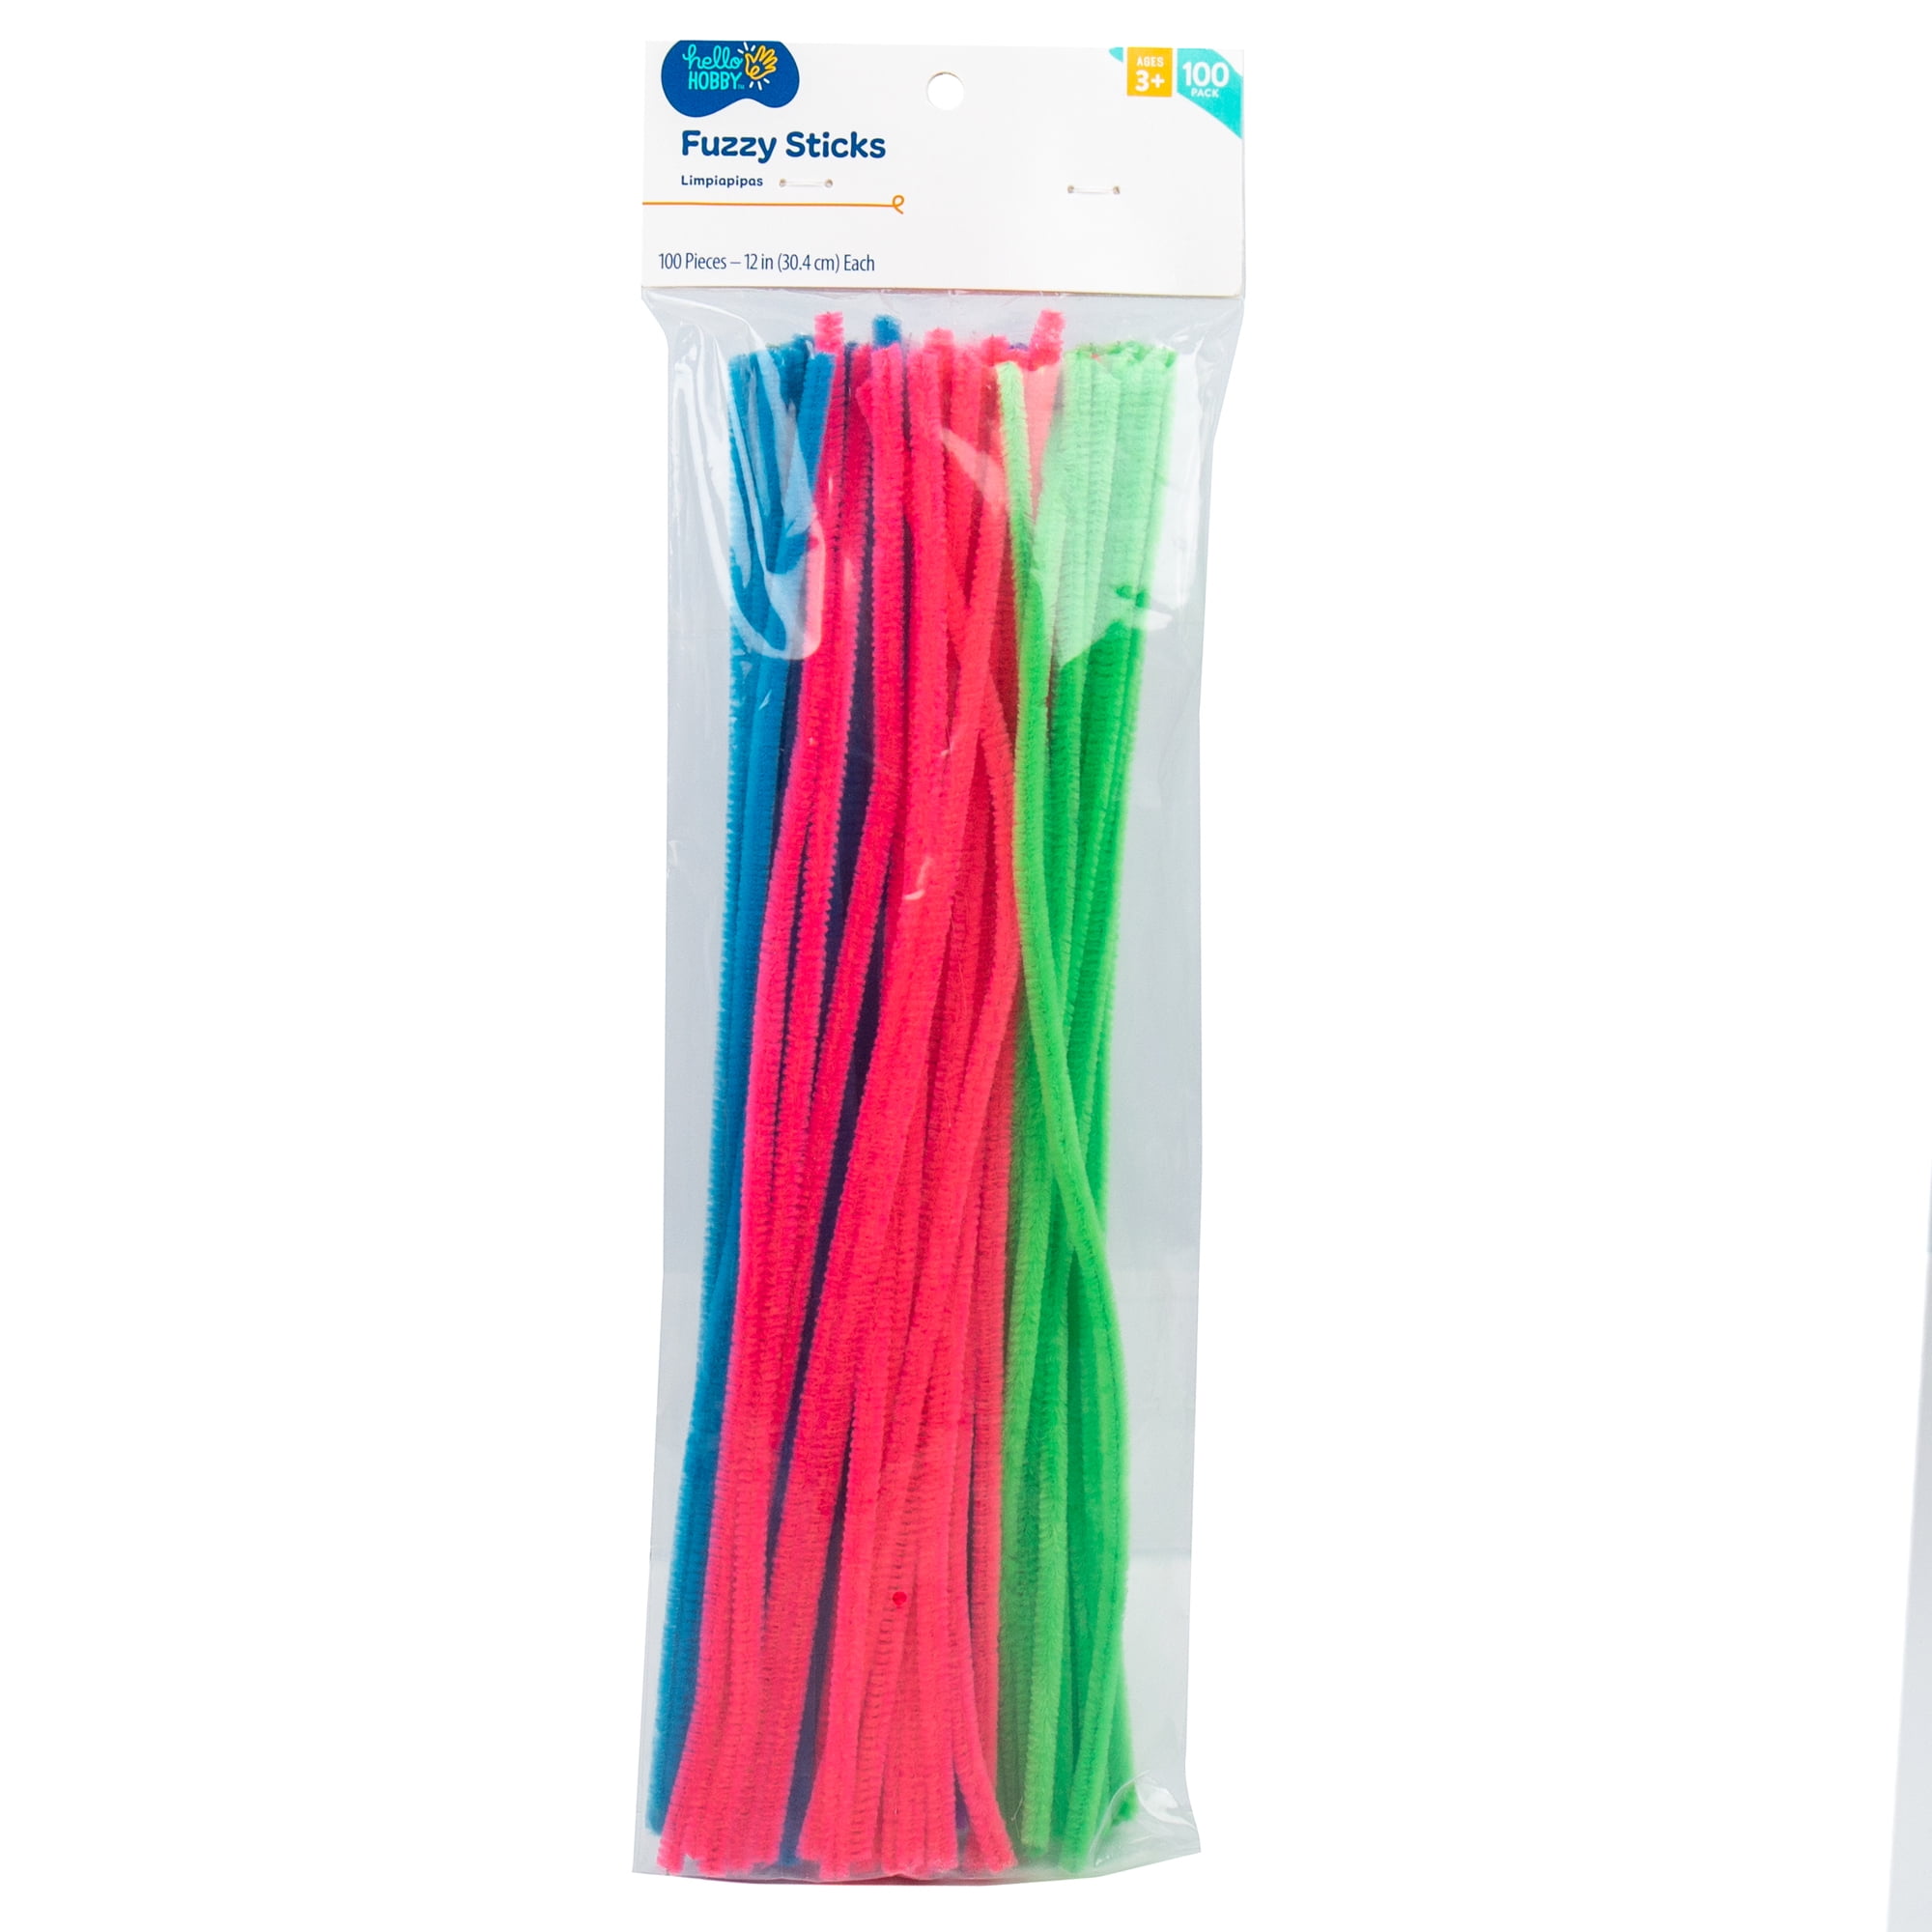 Krafty Kids Pastel Spring Colors Fuzzy Craft Sticks Pipe Cleaners 40 Count  12 Inches Long